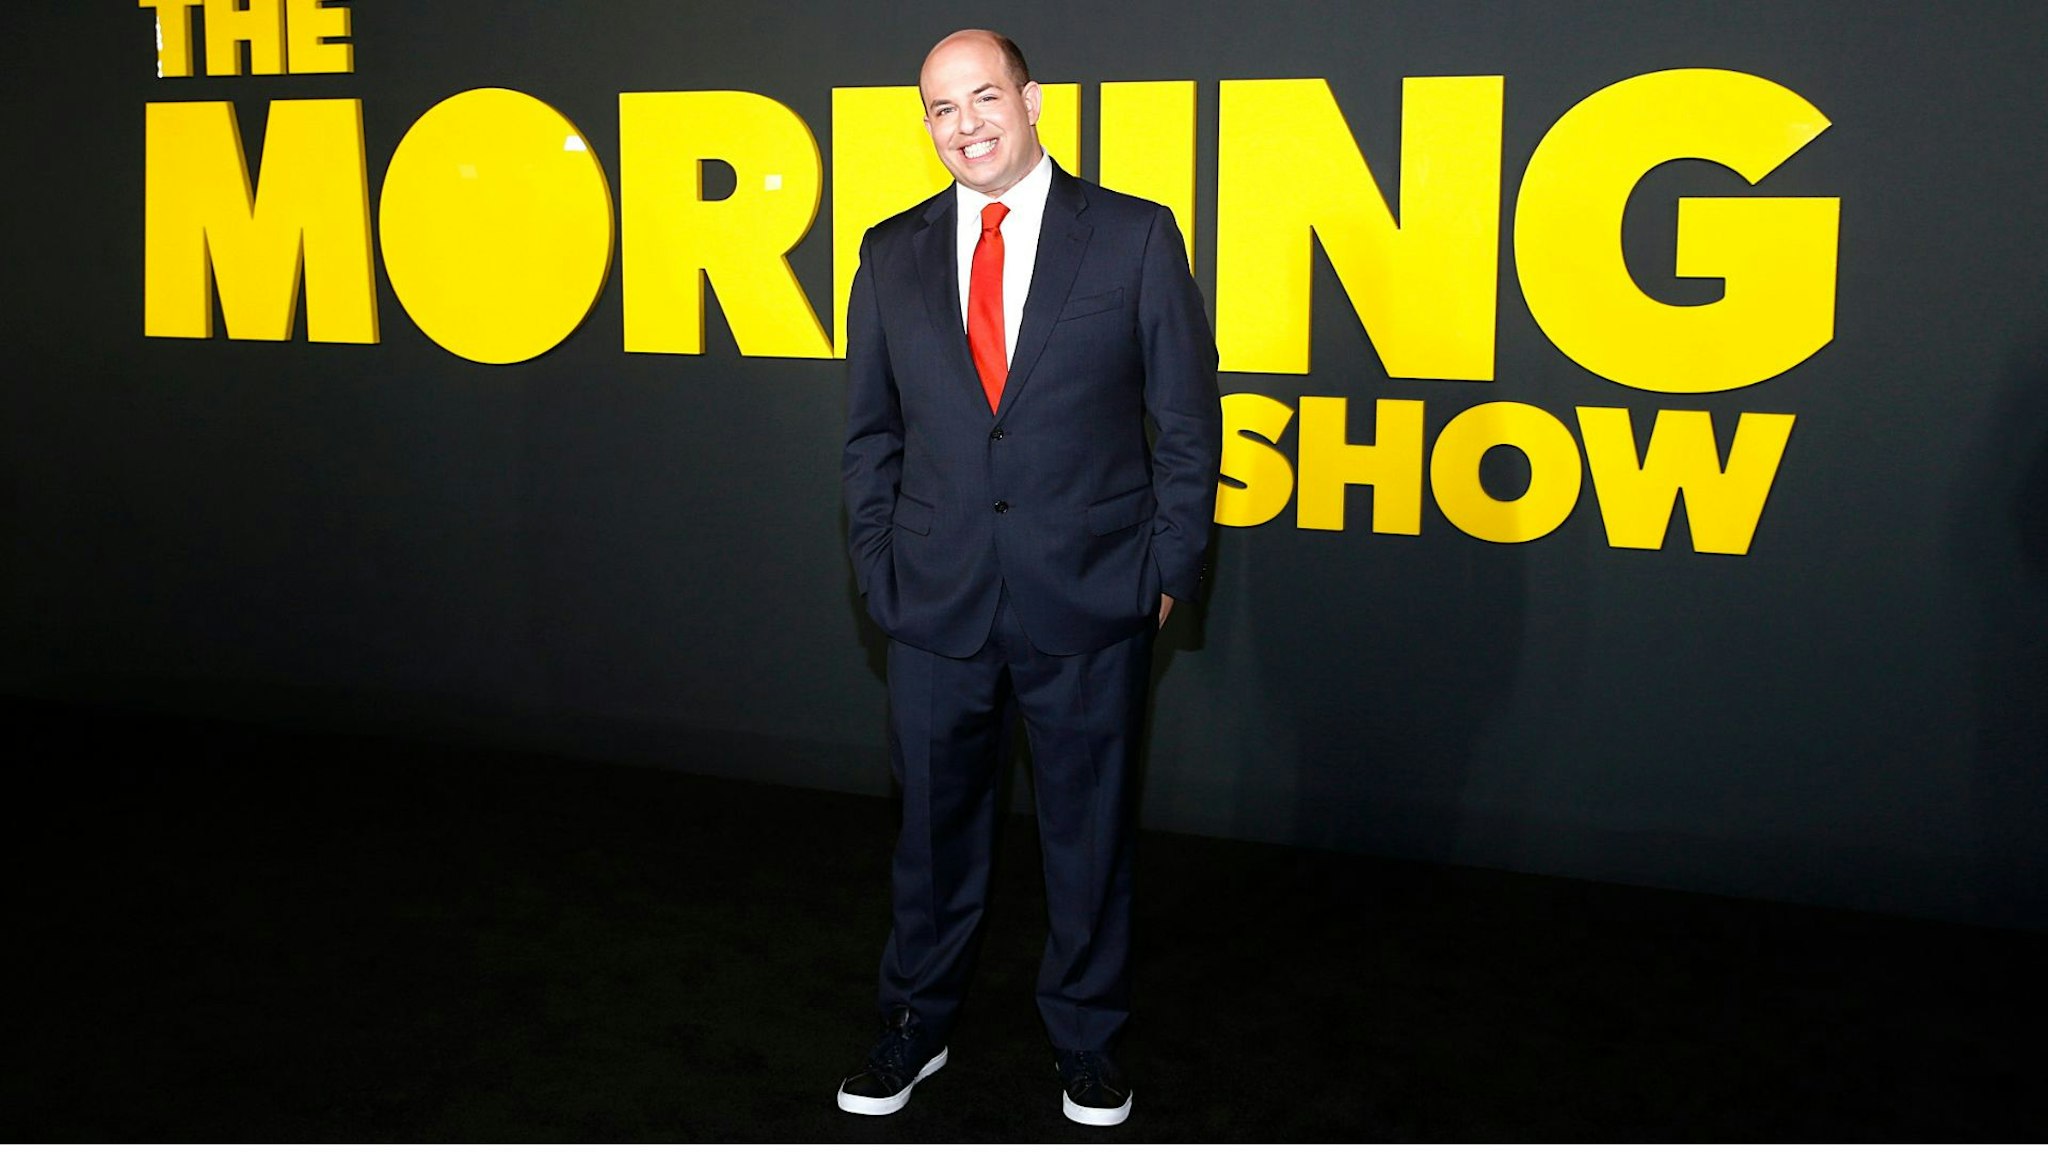 NEW YORK, NEW YORK - OCTOBER 28: Consulting Producer, Brian Stelter attends Apple's global premiere of "The Morning Show" at Josie Robertson Plaza and David Geffen Hall, Lincoln Center for the Performing Arts on October 28, 2019 in New York City.